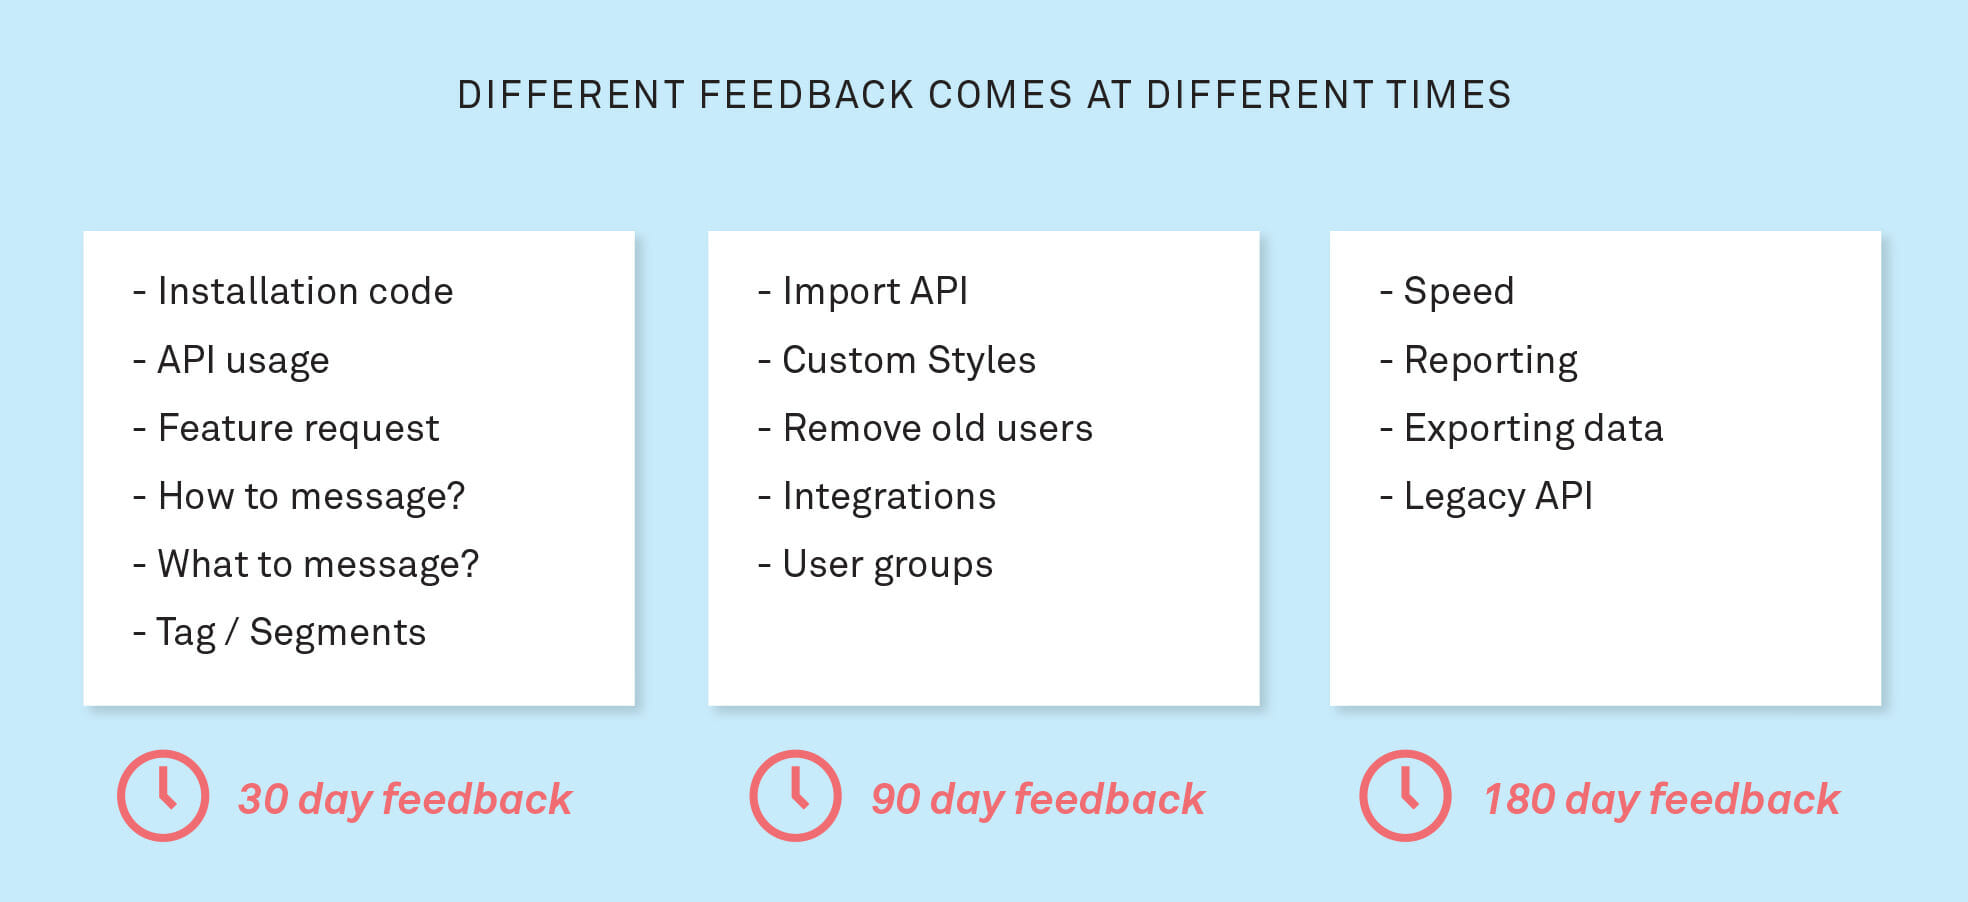 Different Feedback Customer Feedback Comes at Different Times